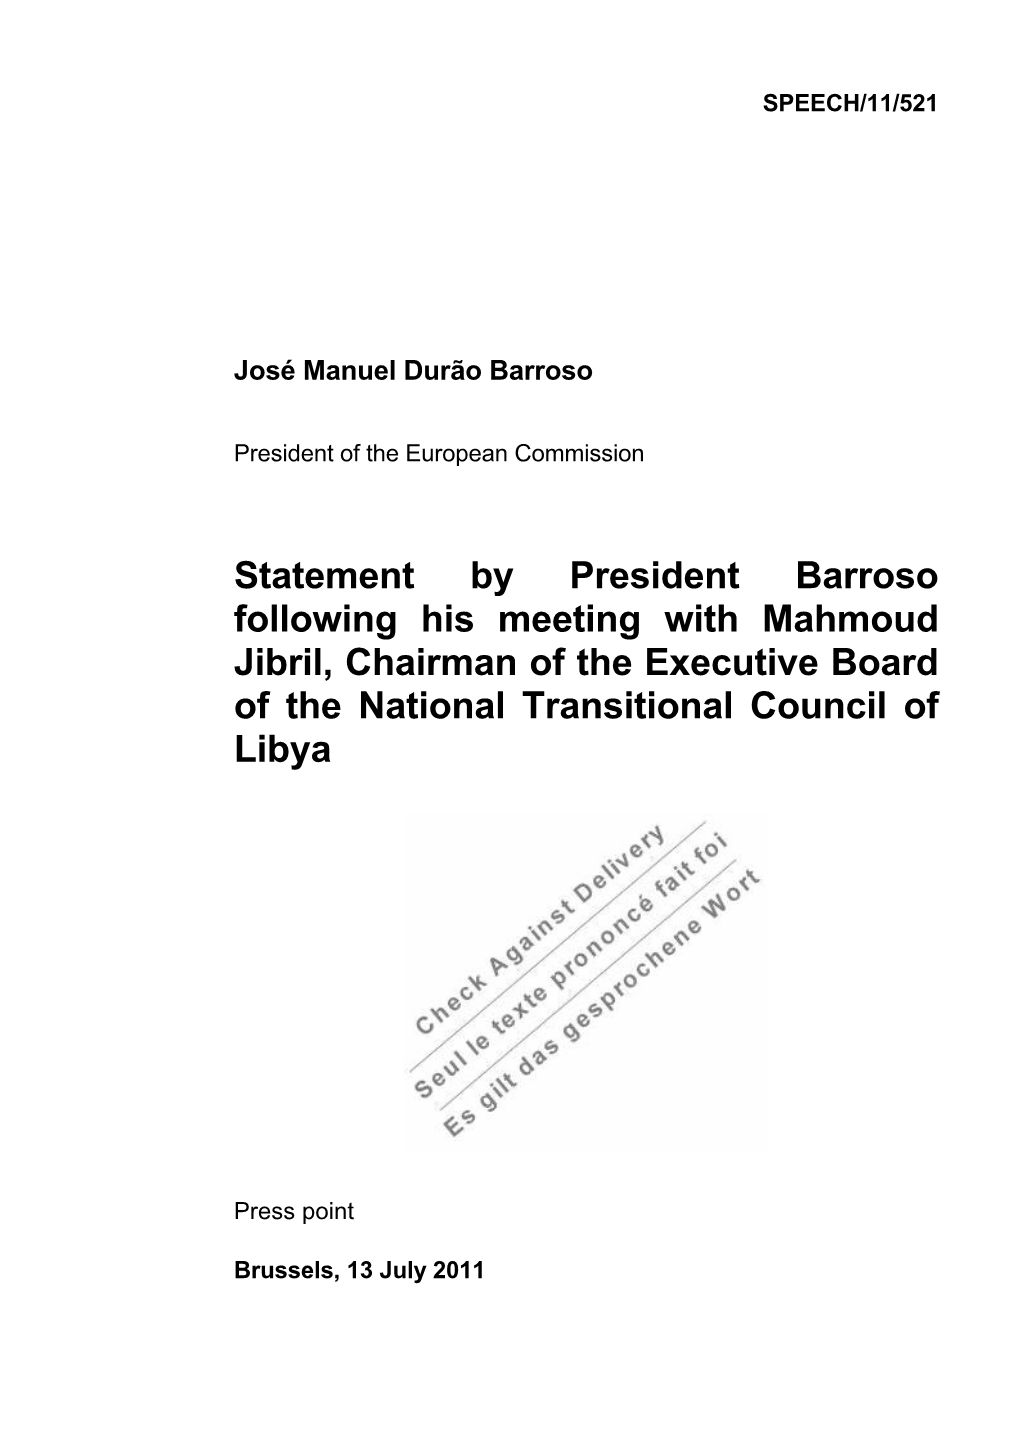 Statement by President Barroso Following His Meeting with Mahmoud Jibril, Chairman of the Executive Board of the National Transitional Council of Libya